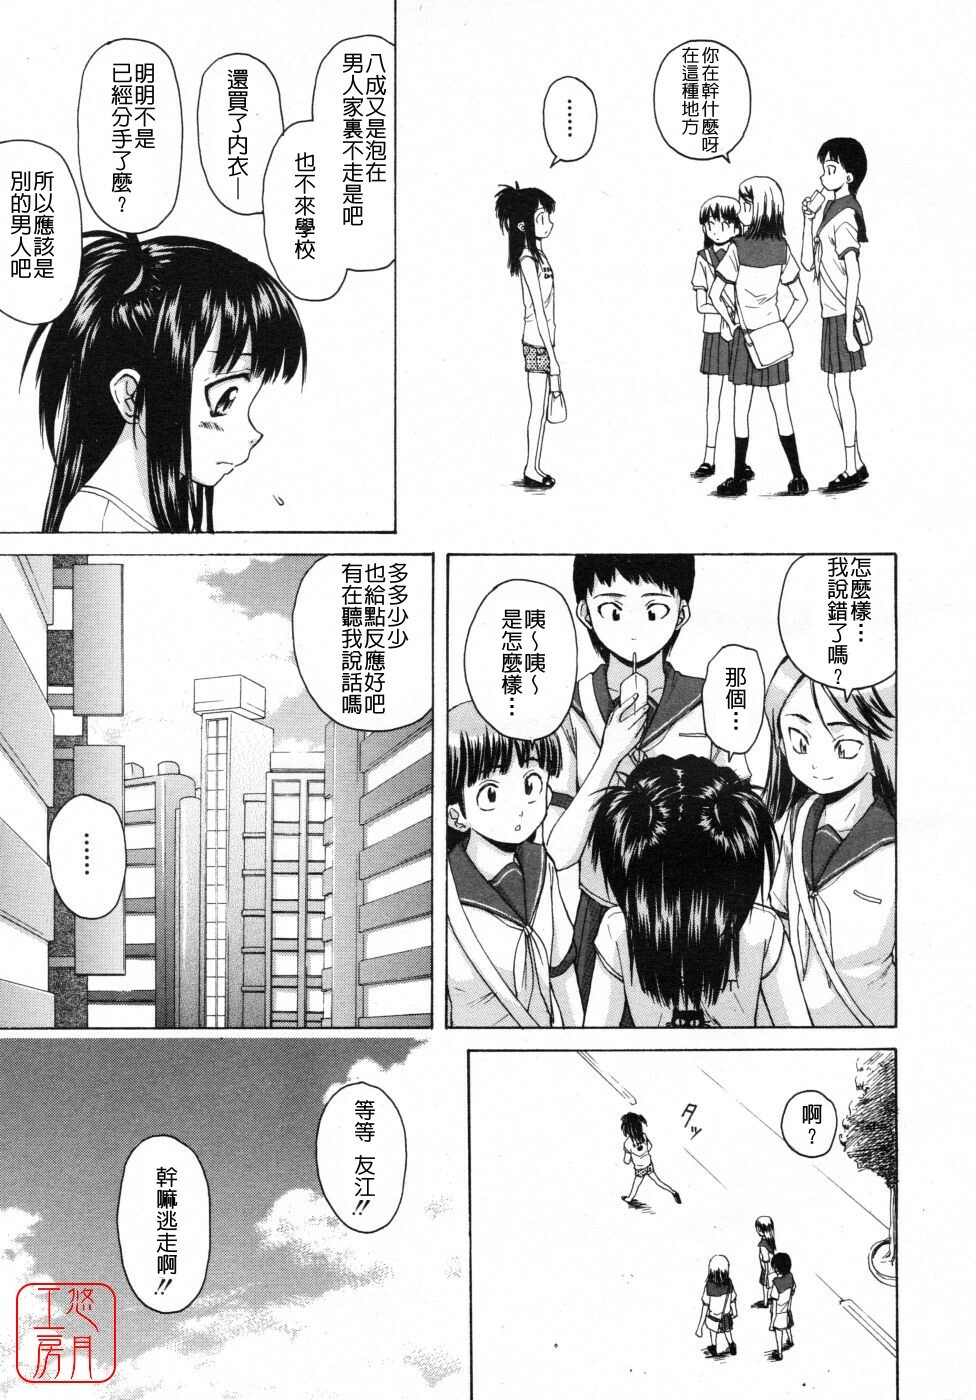 [Fuuga] Girl Friend 2 (Chinese) page 9 full